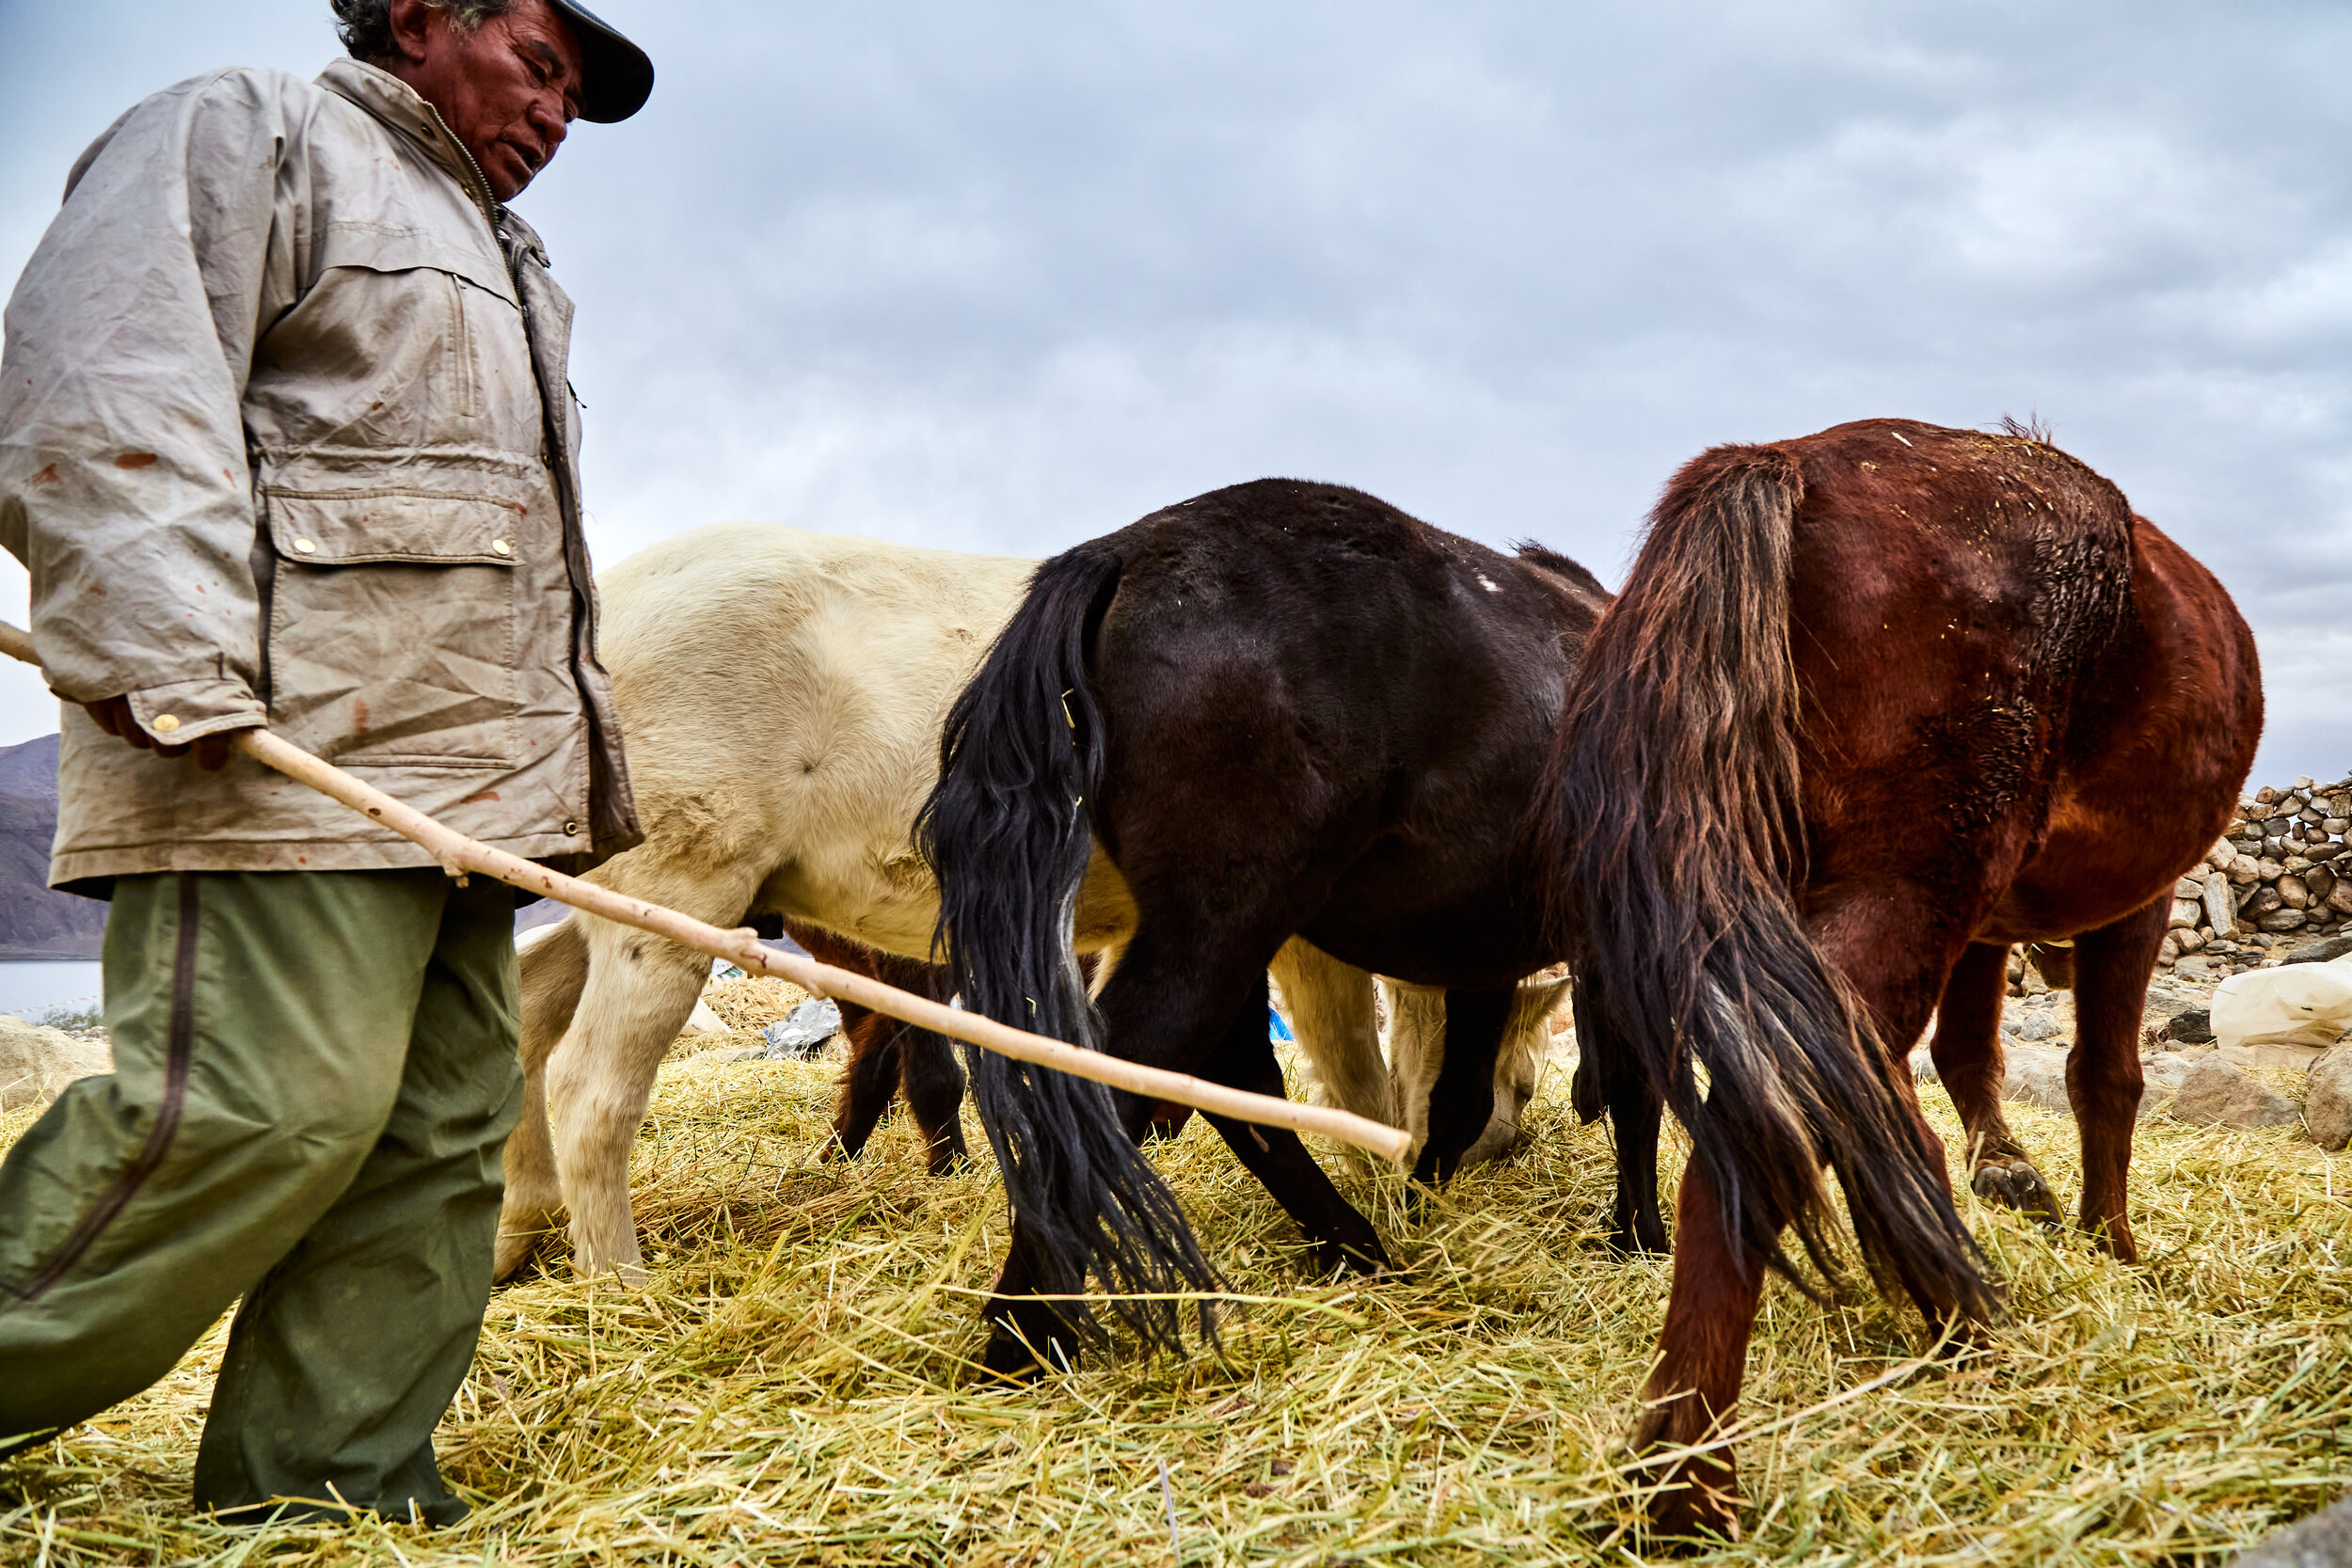  A farmer guiding the horses over the piles of straw after the harvest. 